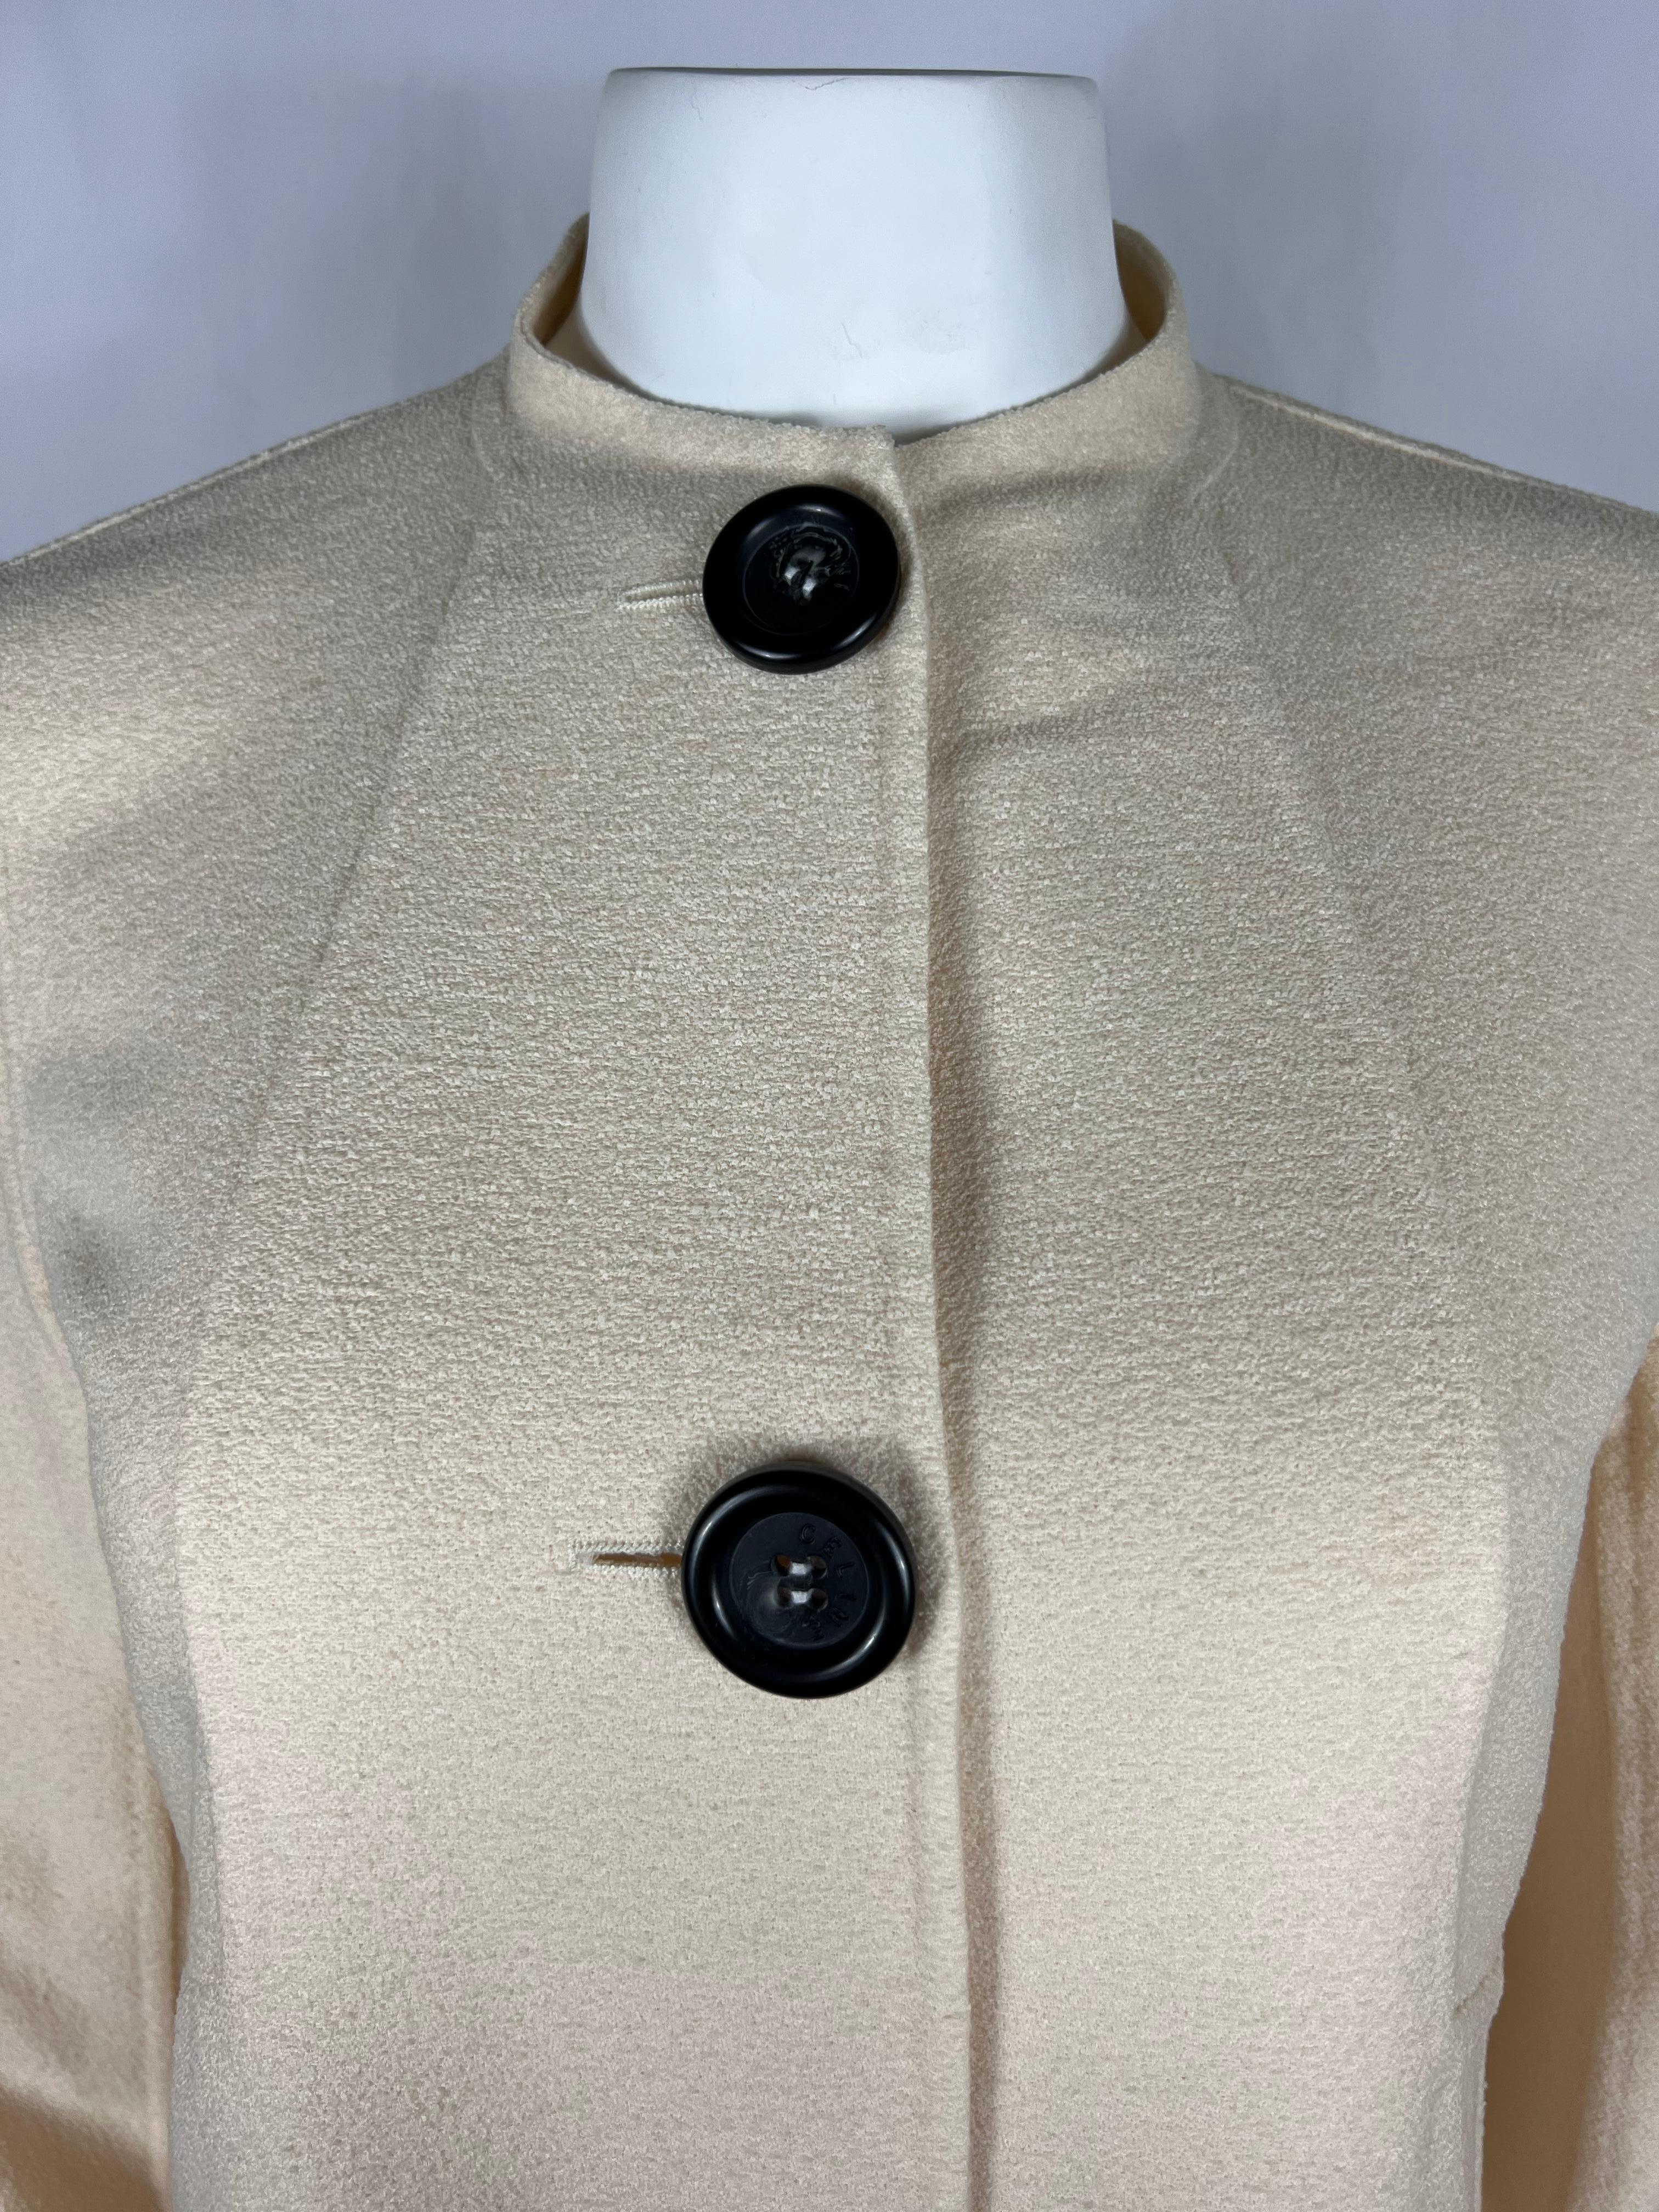 
Celine Coat Jacket, Size Small
• Long sleeves
• Crew neck
• Front large buttons closure
• Side pockets
• Mid length
• Missing tags

Item details:
A casual between-season coat by Celine. Has an uncomplicated fitted silhouette with perfect Celine’s